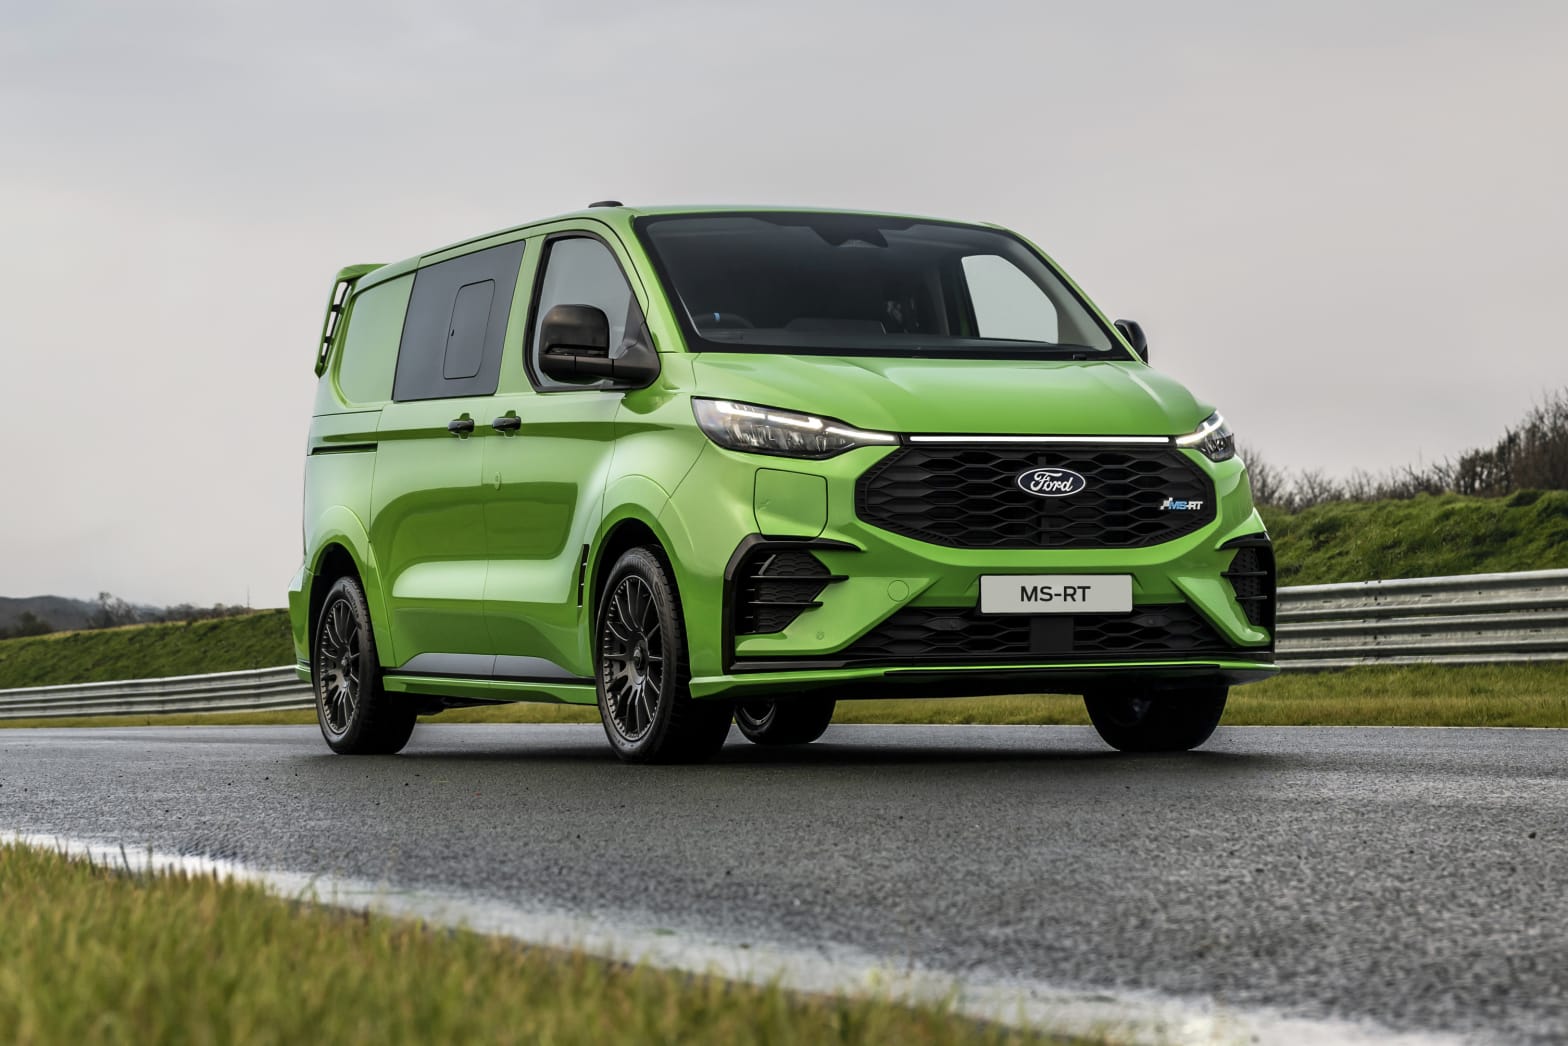 Suppliers to the new Ford Transit Custom